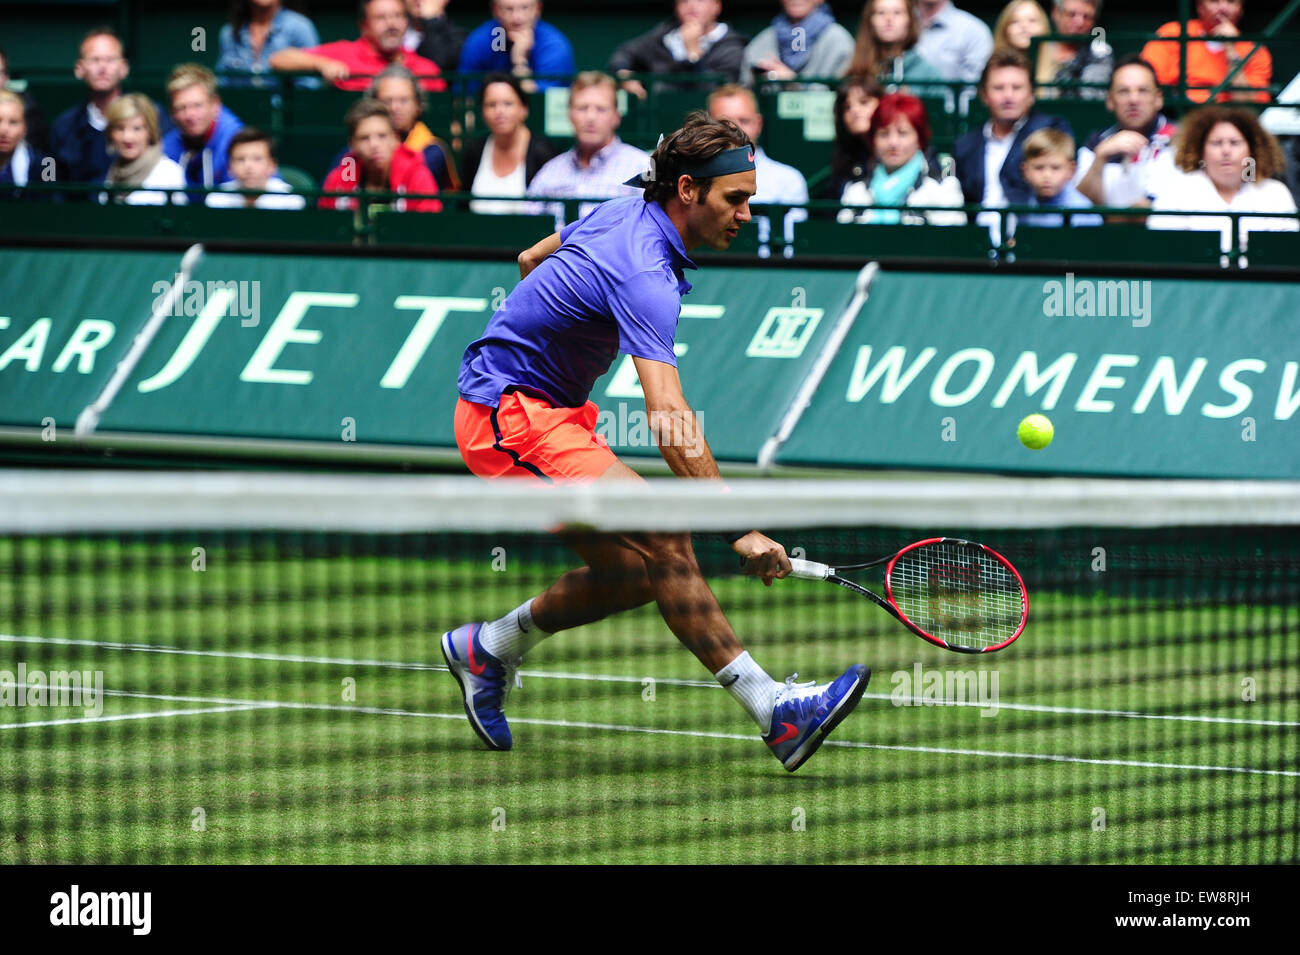 Flash exegese Helaas Halle (Westfalen), Germany. 20th June, 2015. Roger Federer volley at the  net during a match of the Gerry Weber Open semi-finals against Ivo Karlovic  in Halle (Westfalen) on June 20, 2015. Credit: